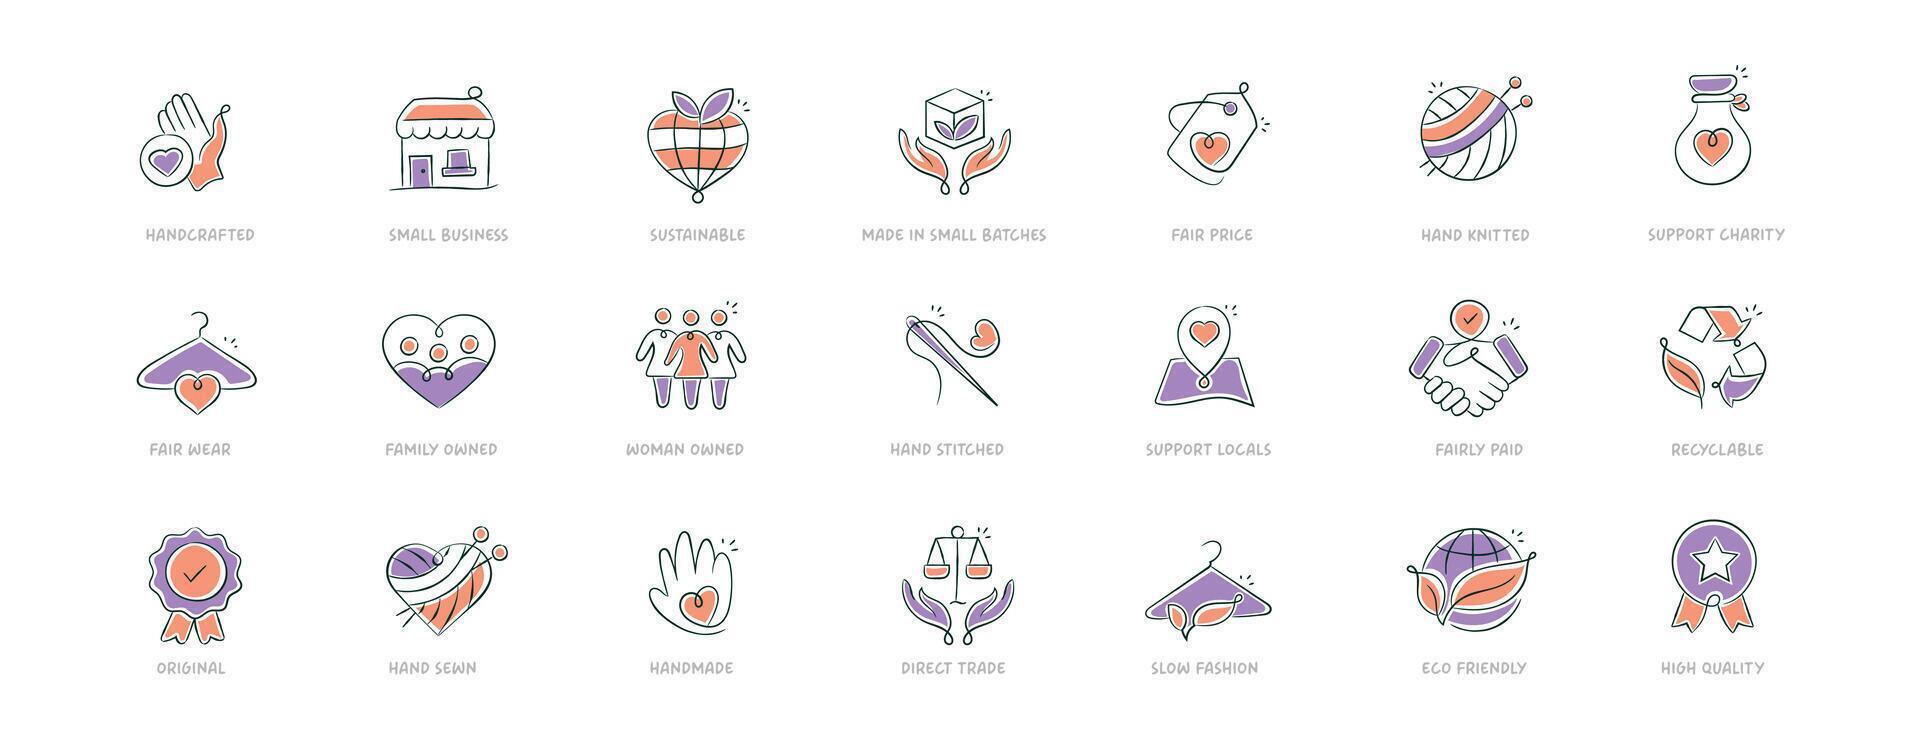 Sustainable and Ethical Handmade Icons. Artisanal Icons for Sustainable Brands. Ethical Handmade Icons for Eco-Friendly Brands vector